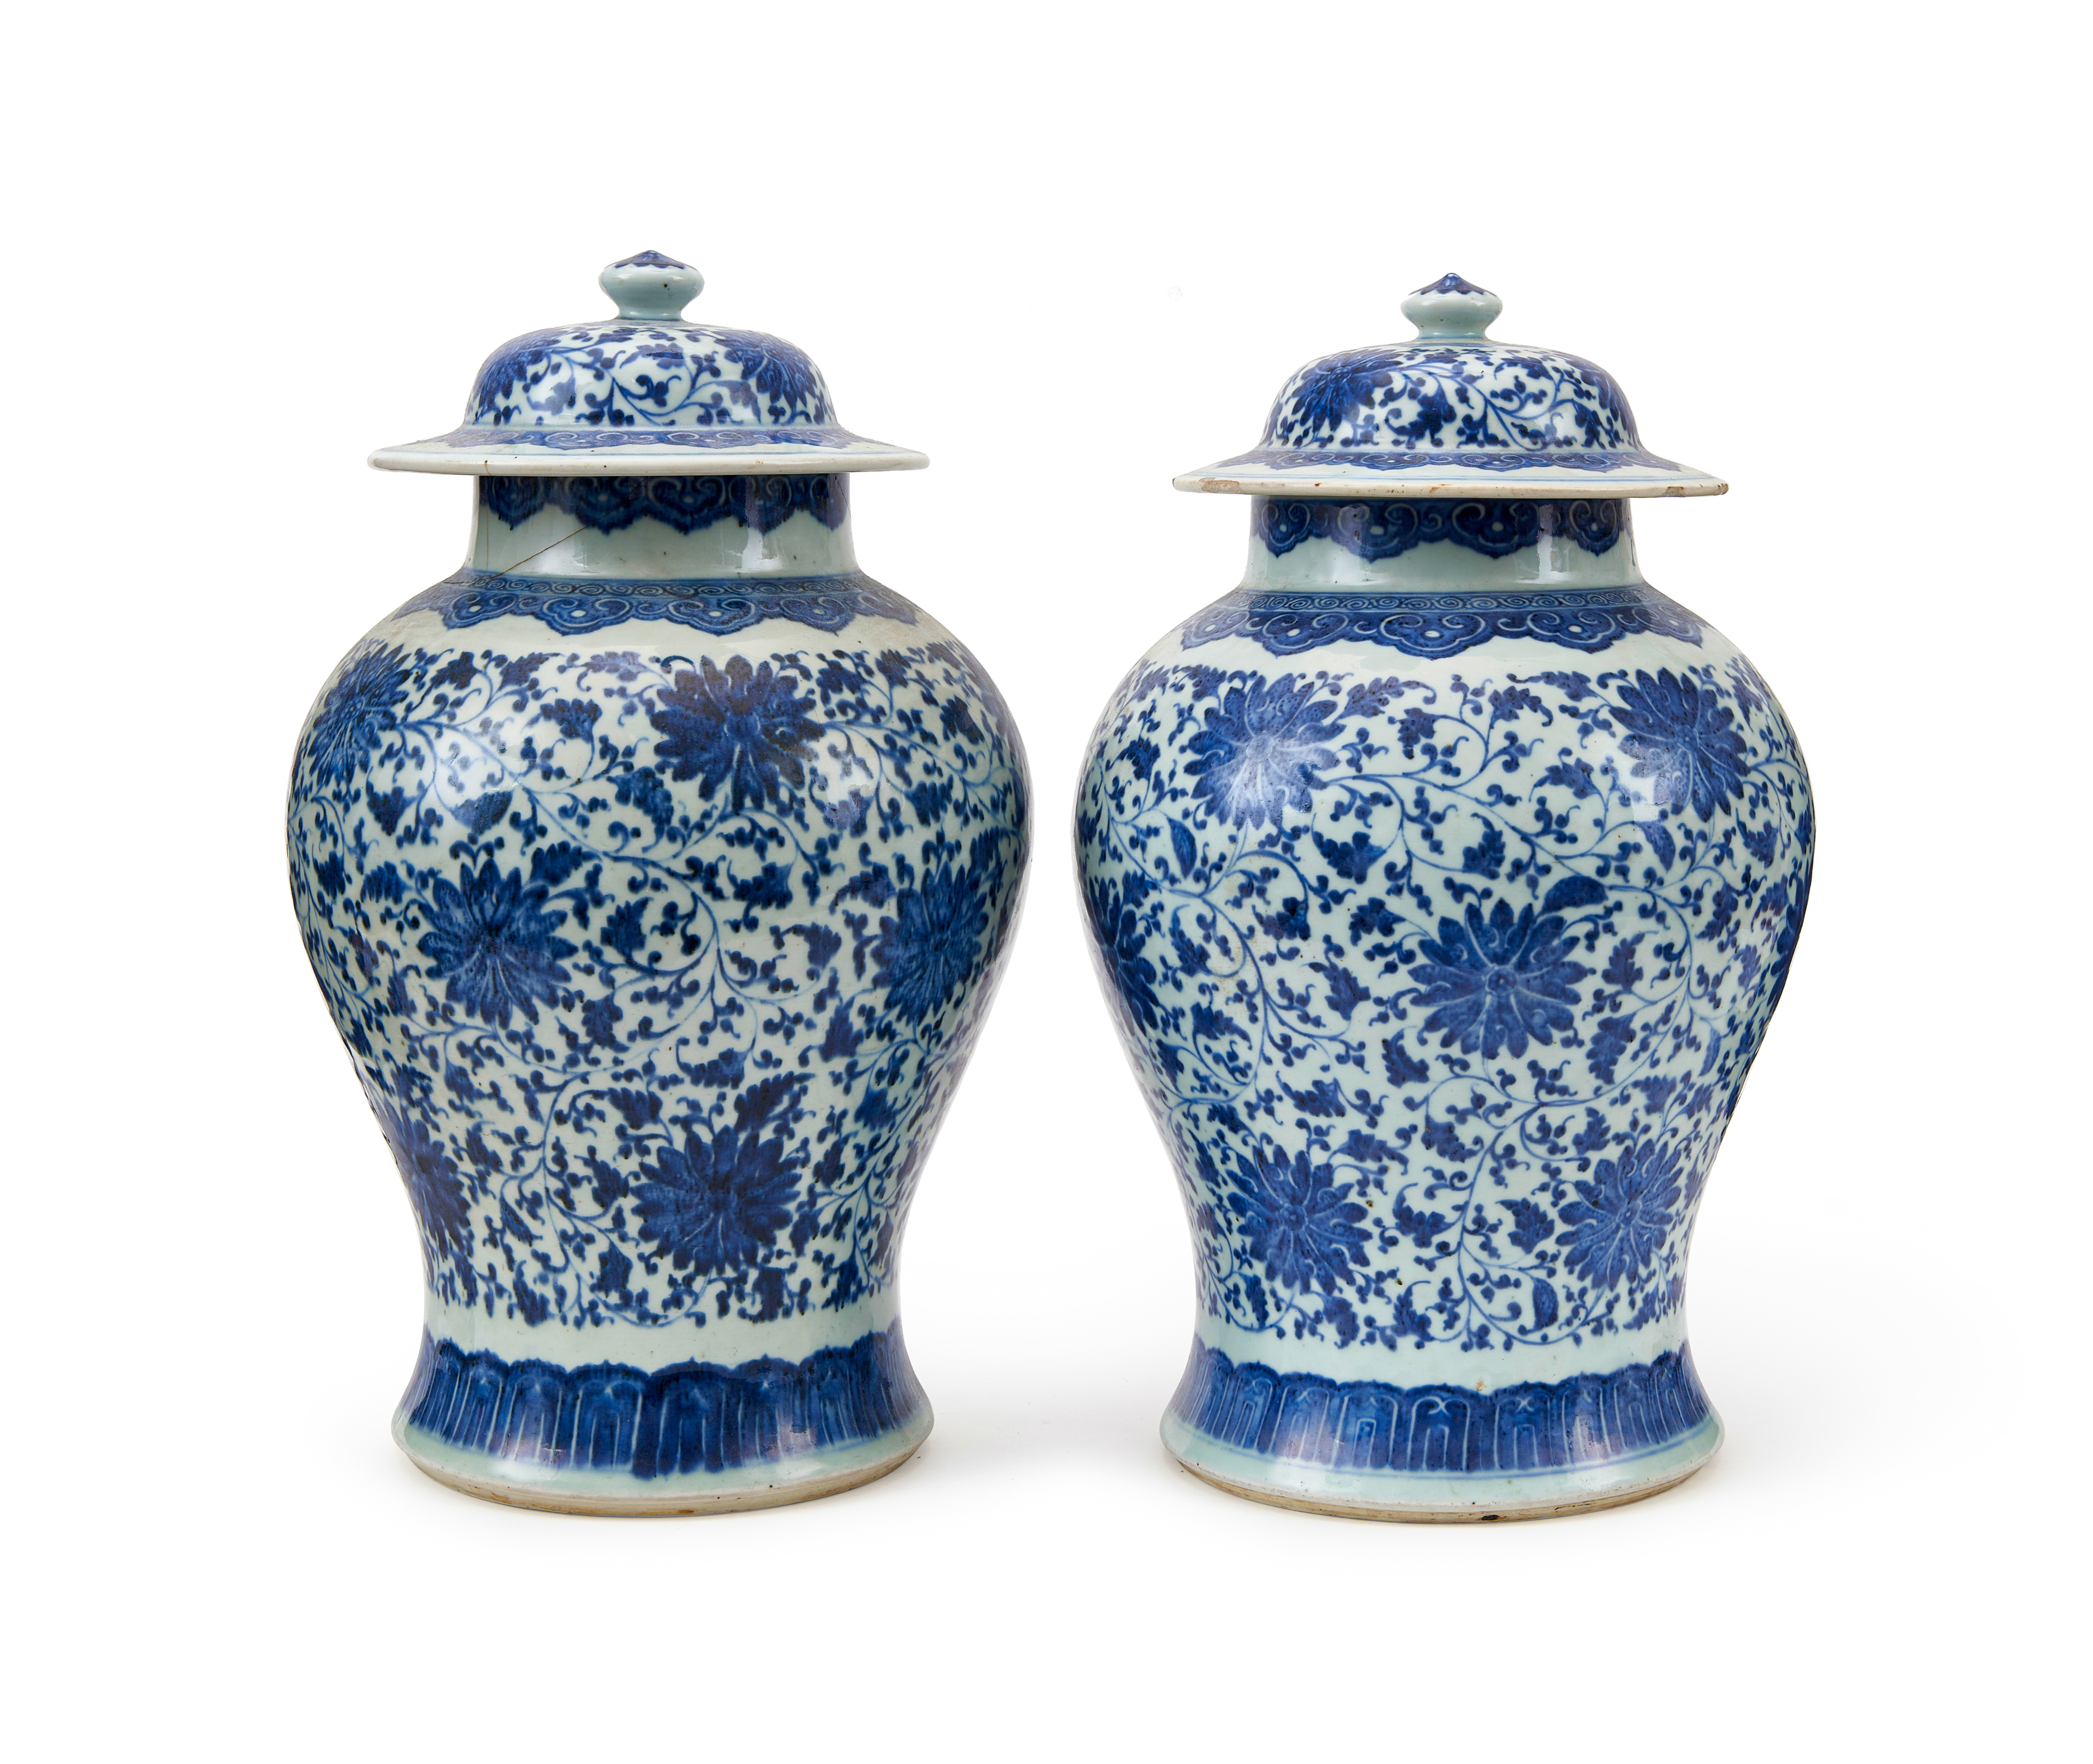 A PAIR OF BLUE & WHITE VASES, QING DYNASTY (1644-1911)